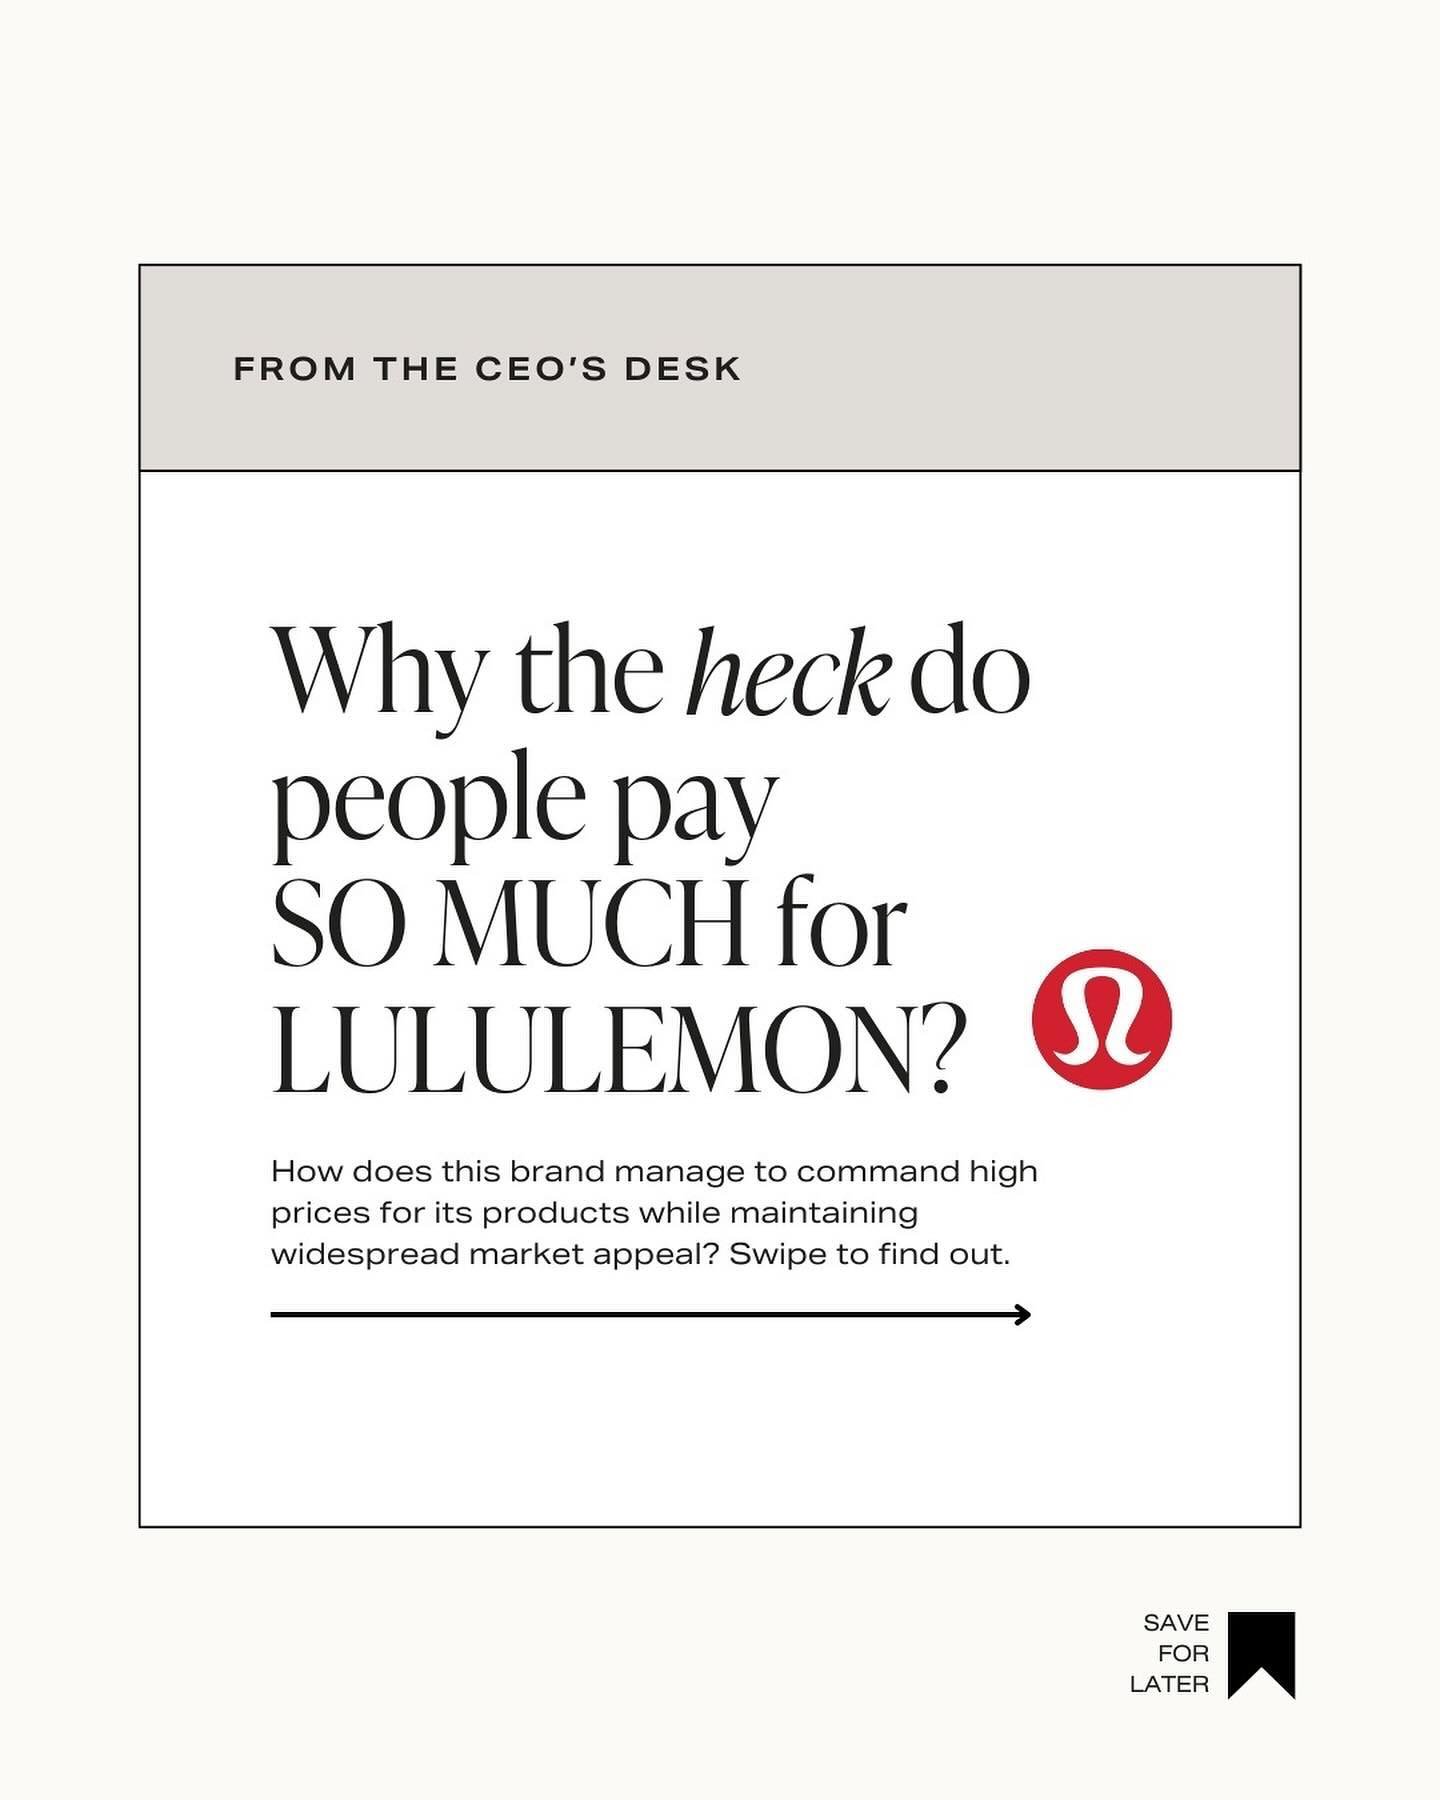 Raise your ✋🏻 if you own at least one article of Lululemon clothing (belt bags count!). 
⠀⠀⠀⠀⠀⠀⠀⠀⠀
Have you ever wondered how this brand charges exorbitant prices while maintaining widespread market appeal, dressing Olympians, regular gym-goers, and